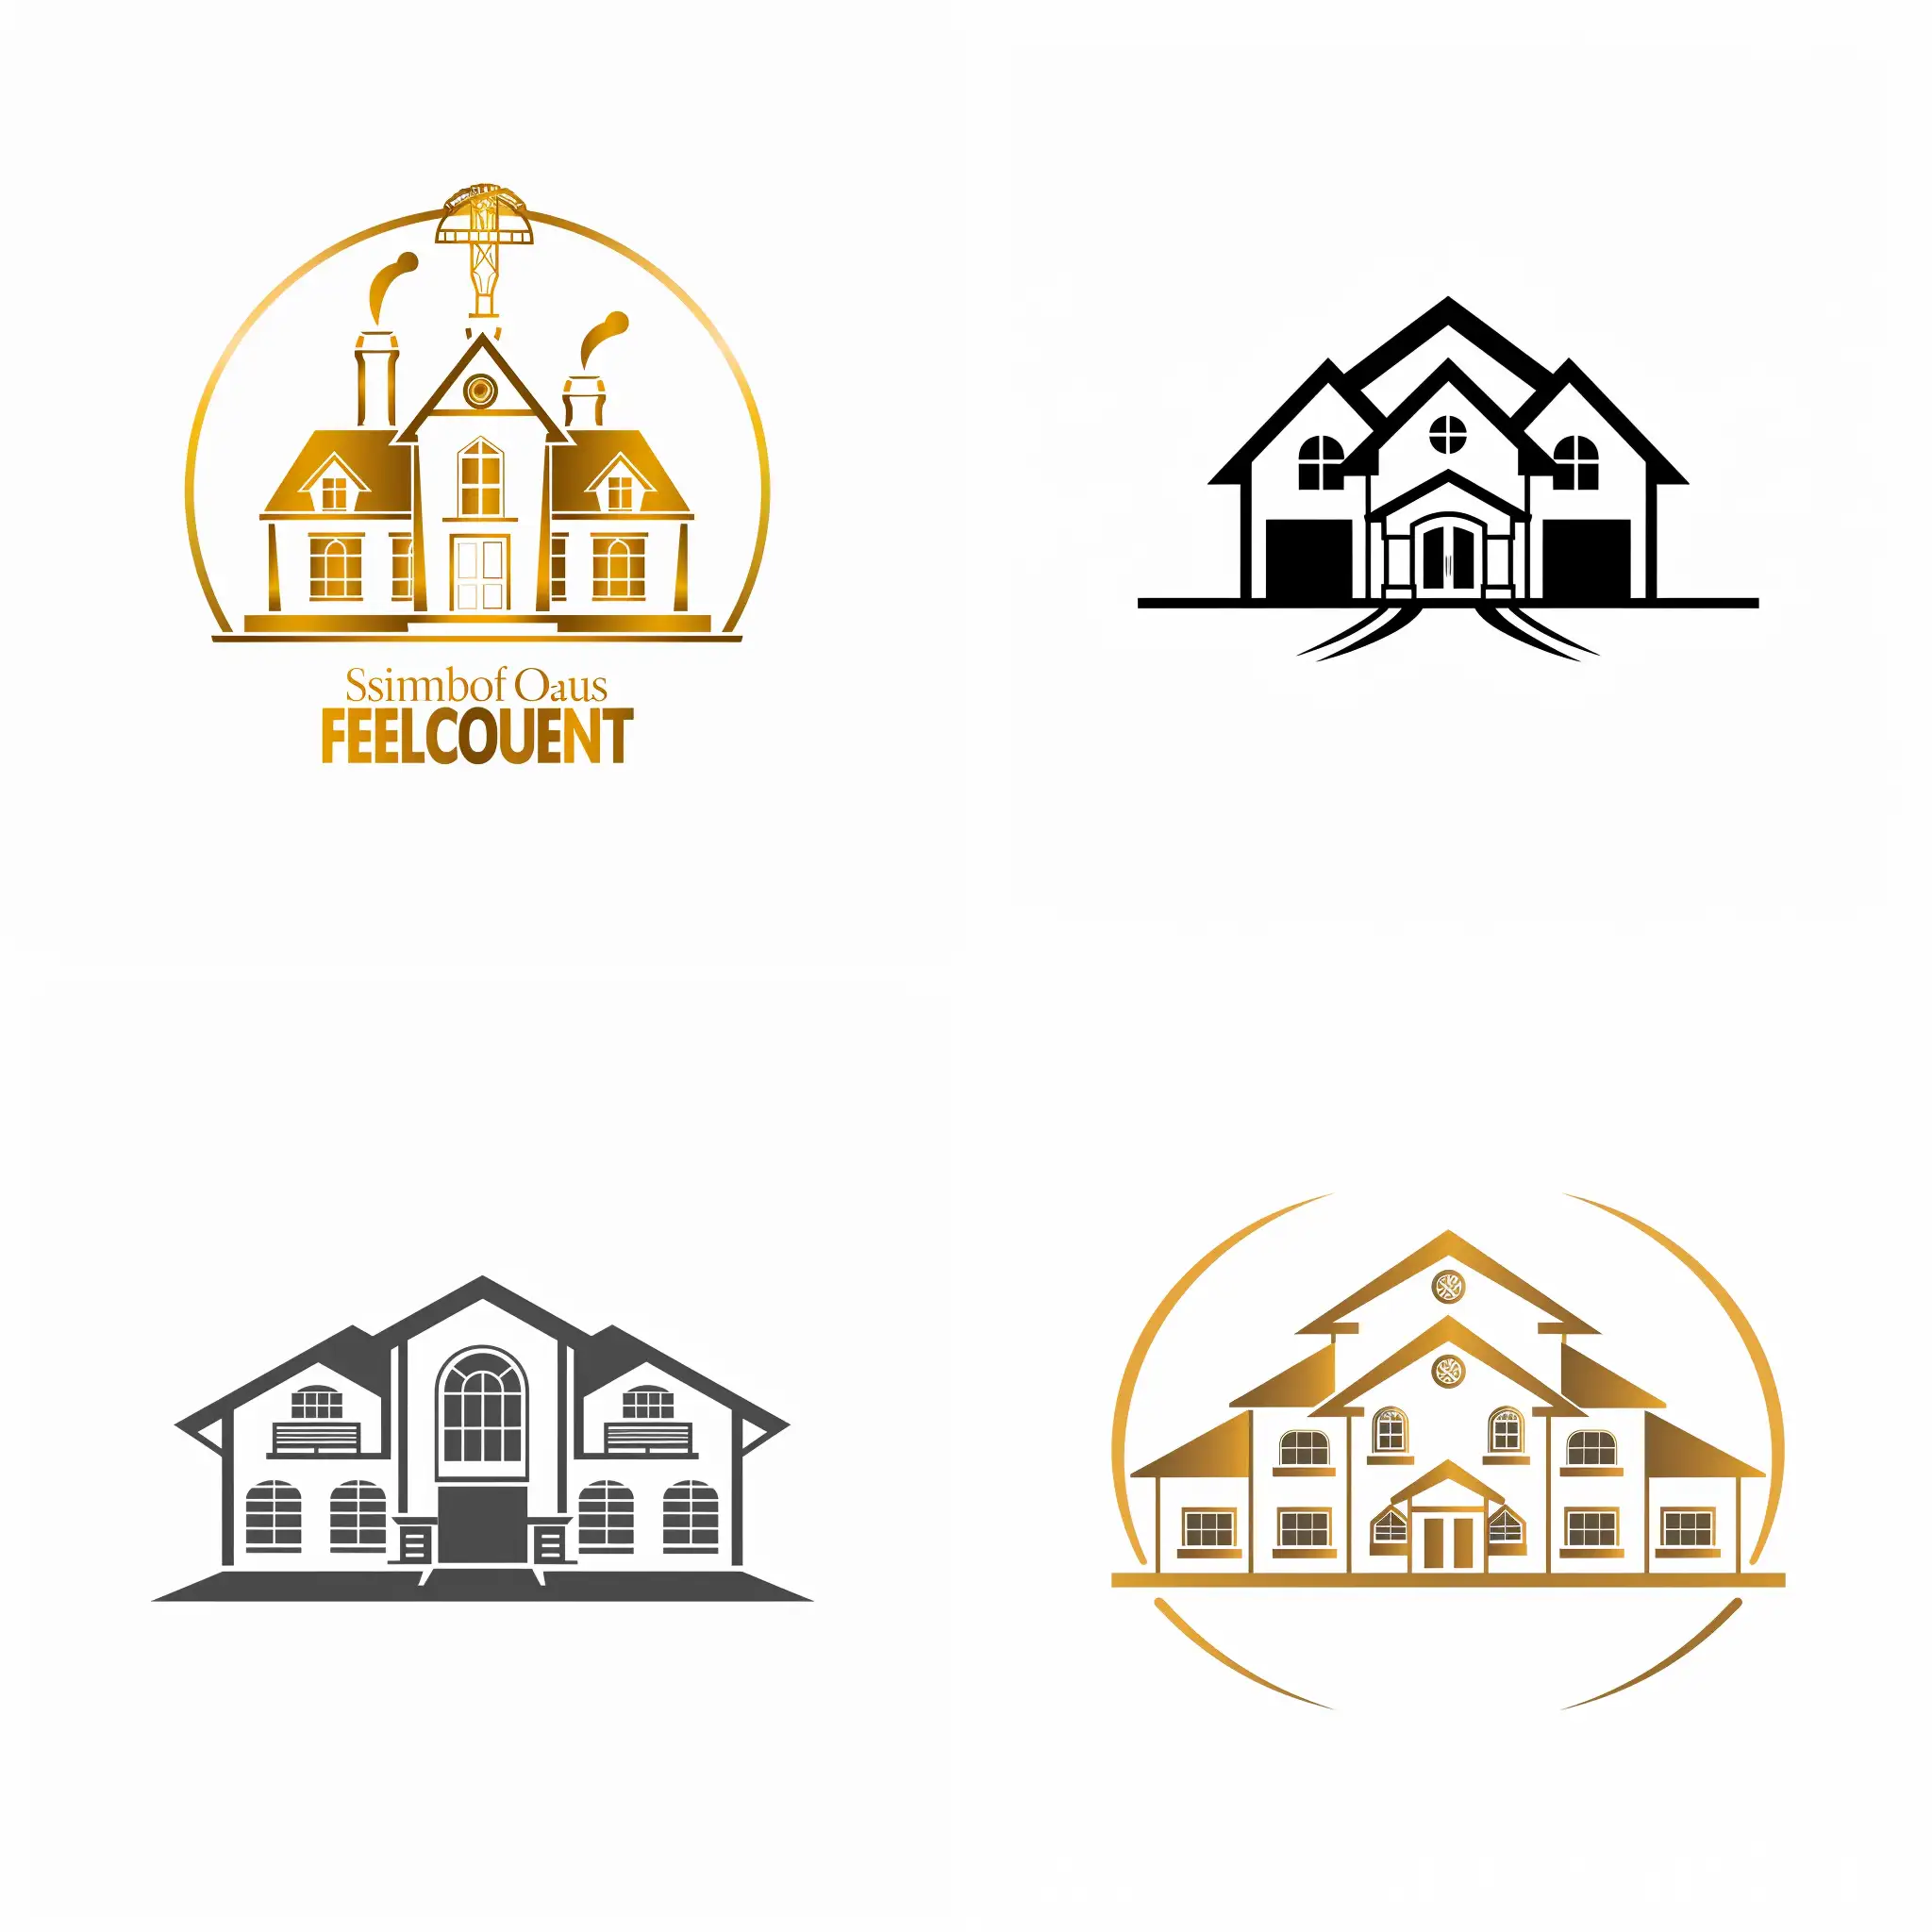 
simple of  luxurious house minimalist logo for real estate agent, no details, back and white, no colors, white background color